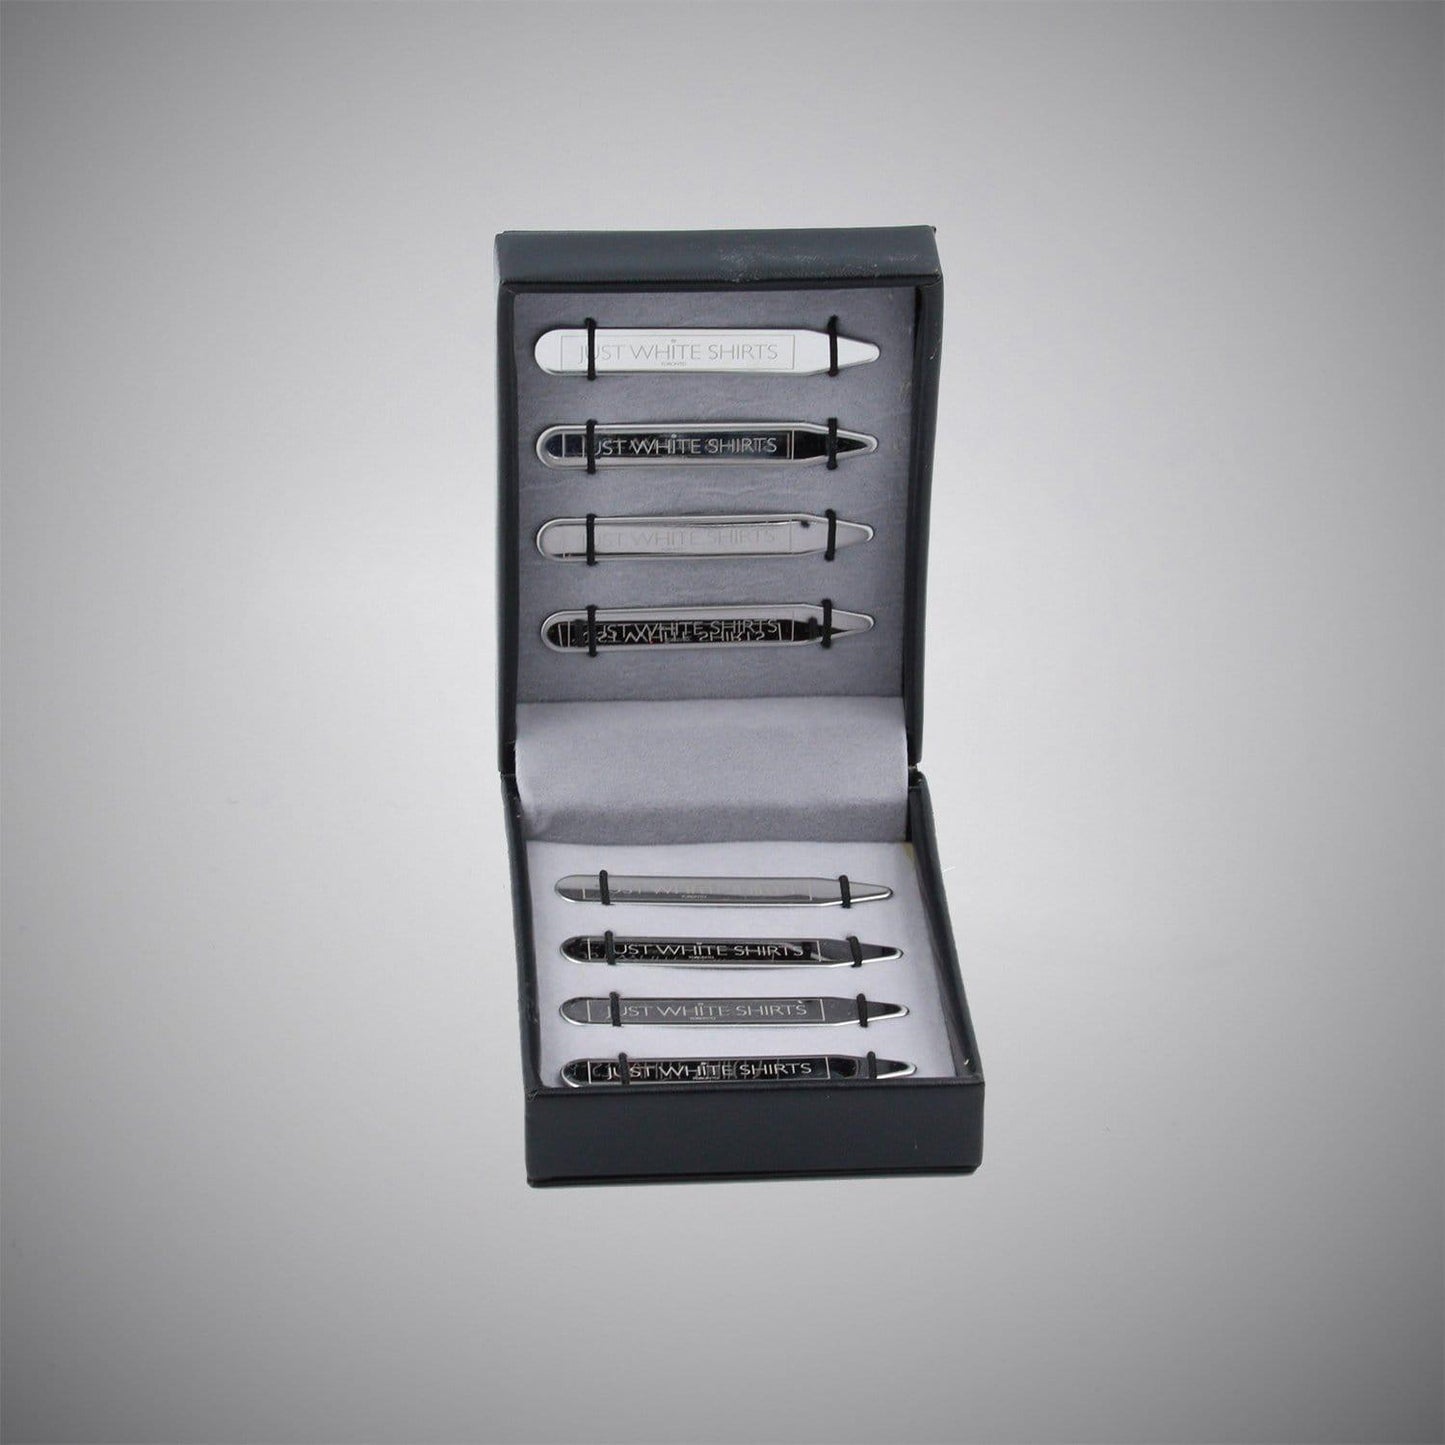 Silver Chrome Finish Stainless Steel 8 Piece Collar Stay Box Set - Just White Shirts